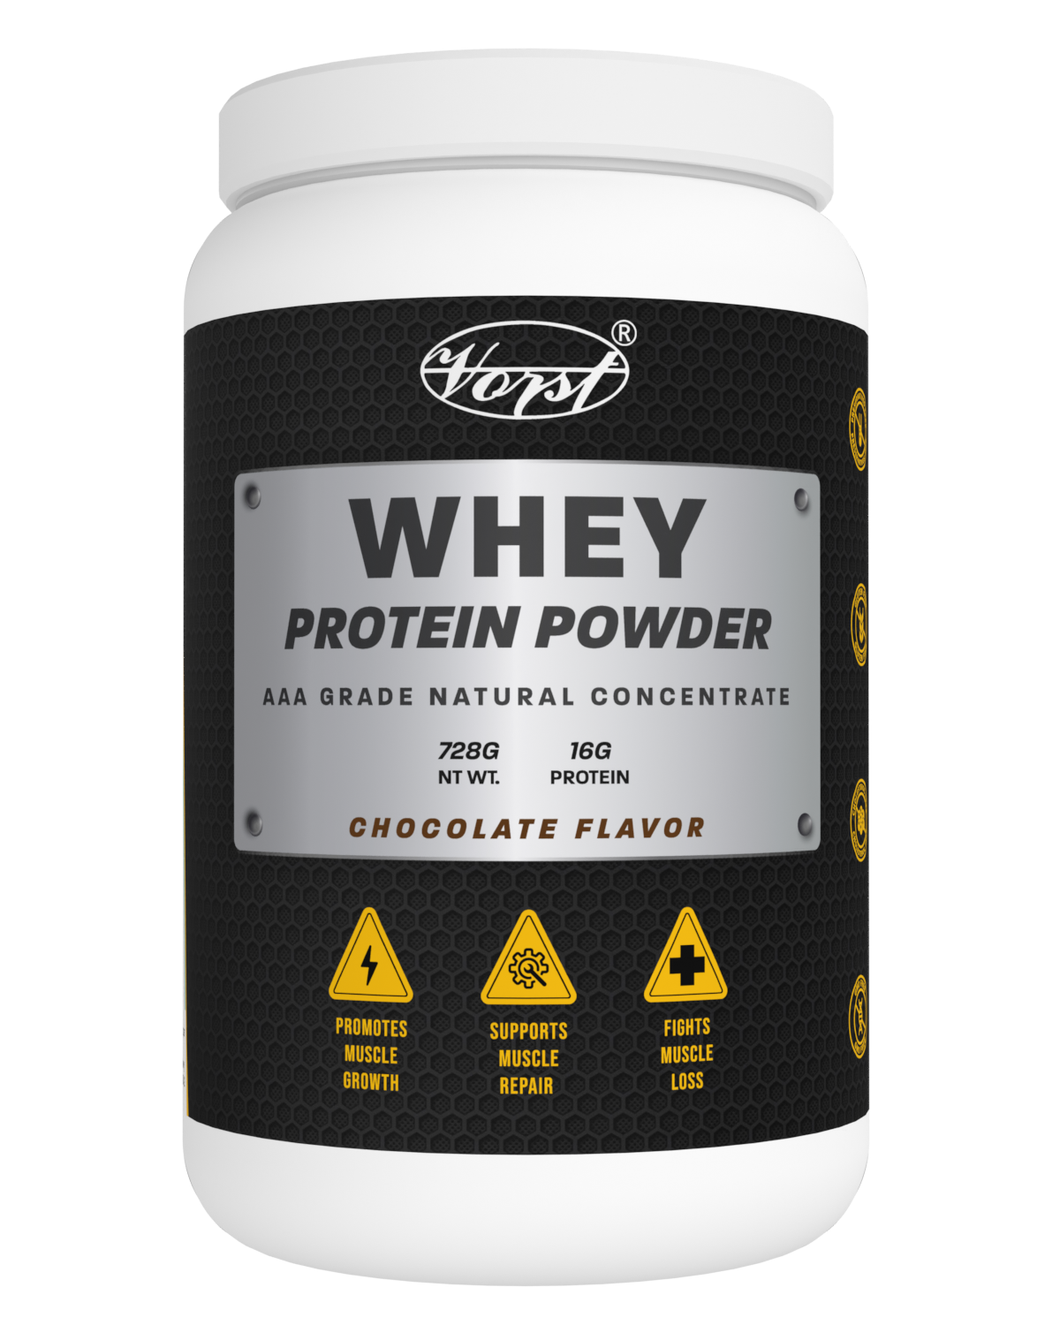 Whey Protein Concentrate Powder 728g Chocolate Flavored 28 Servings